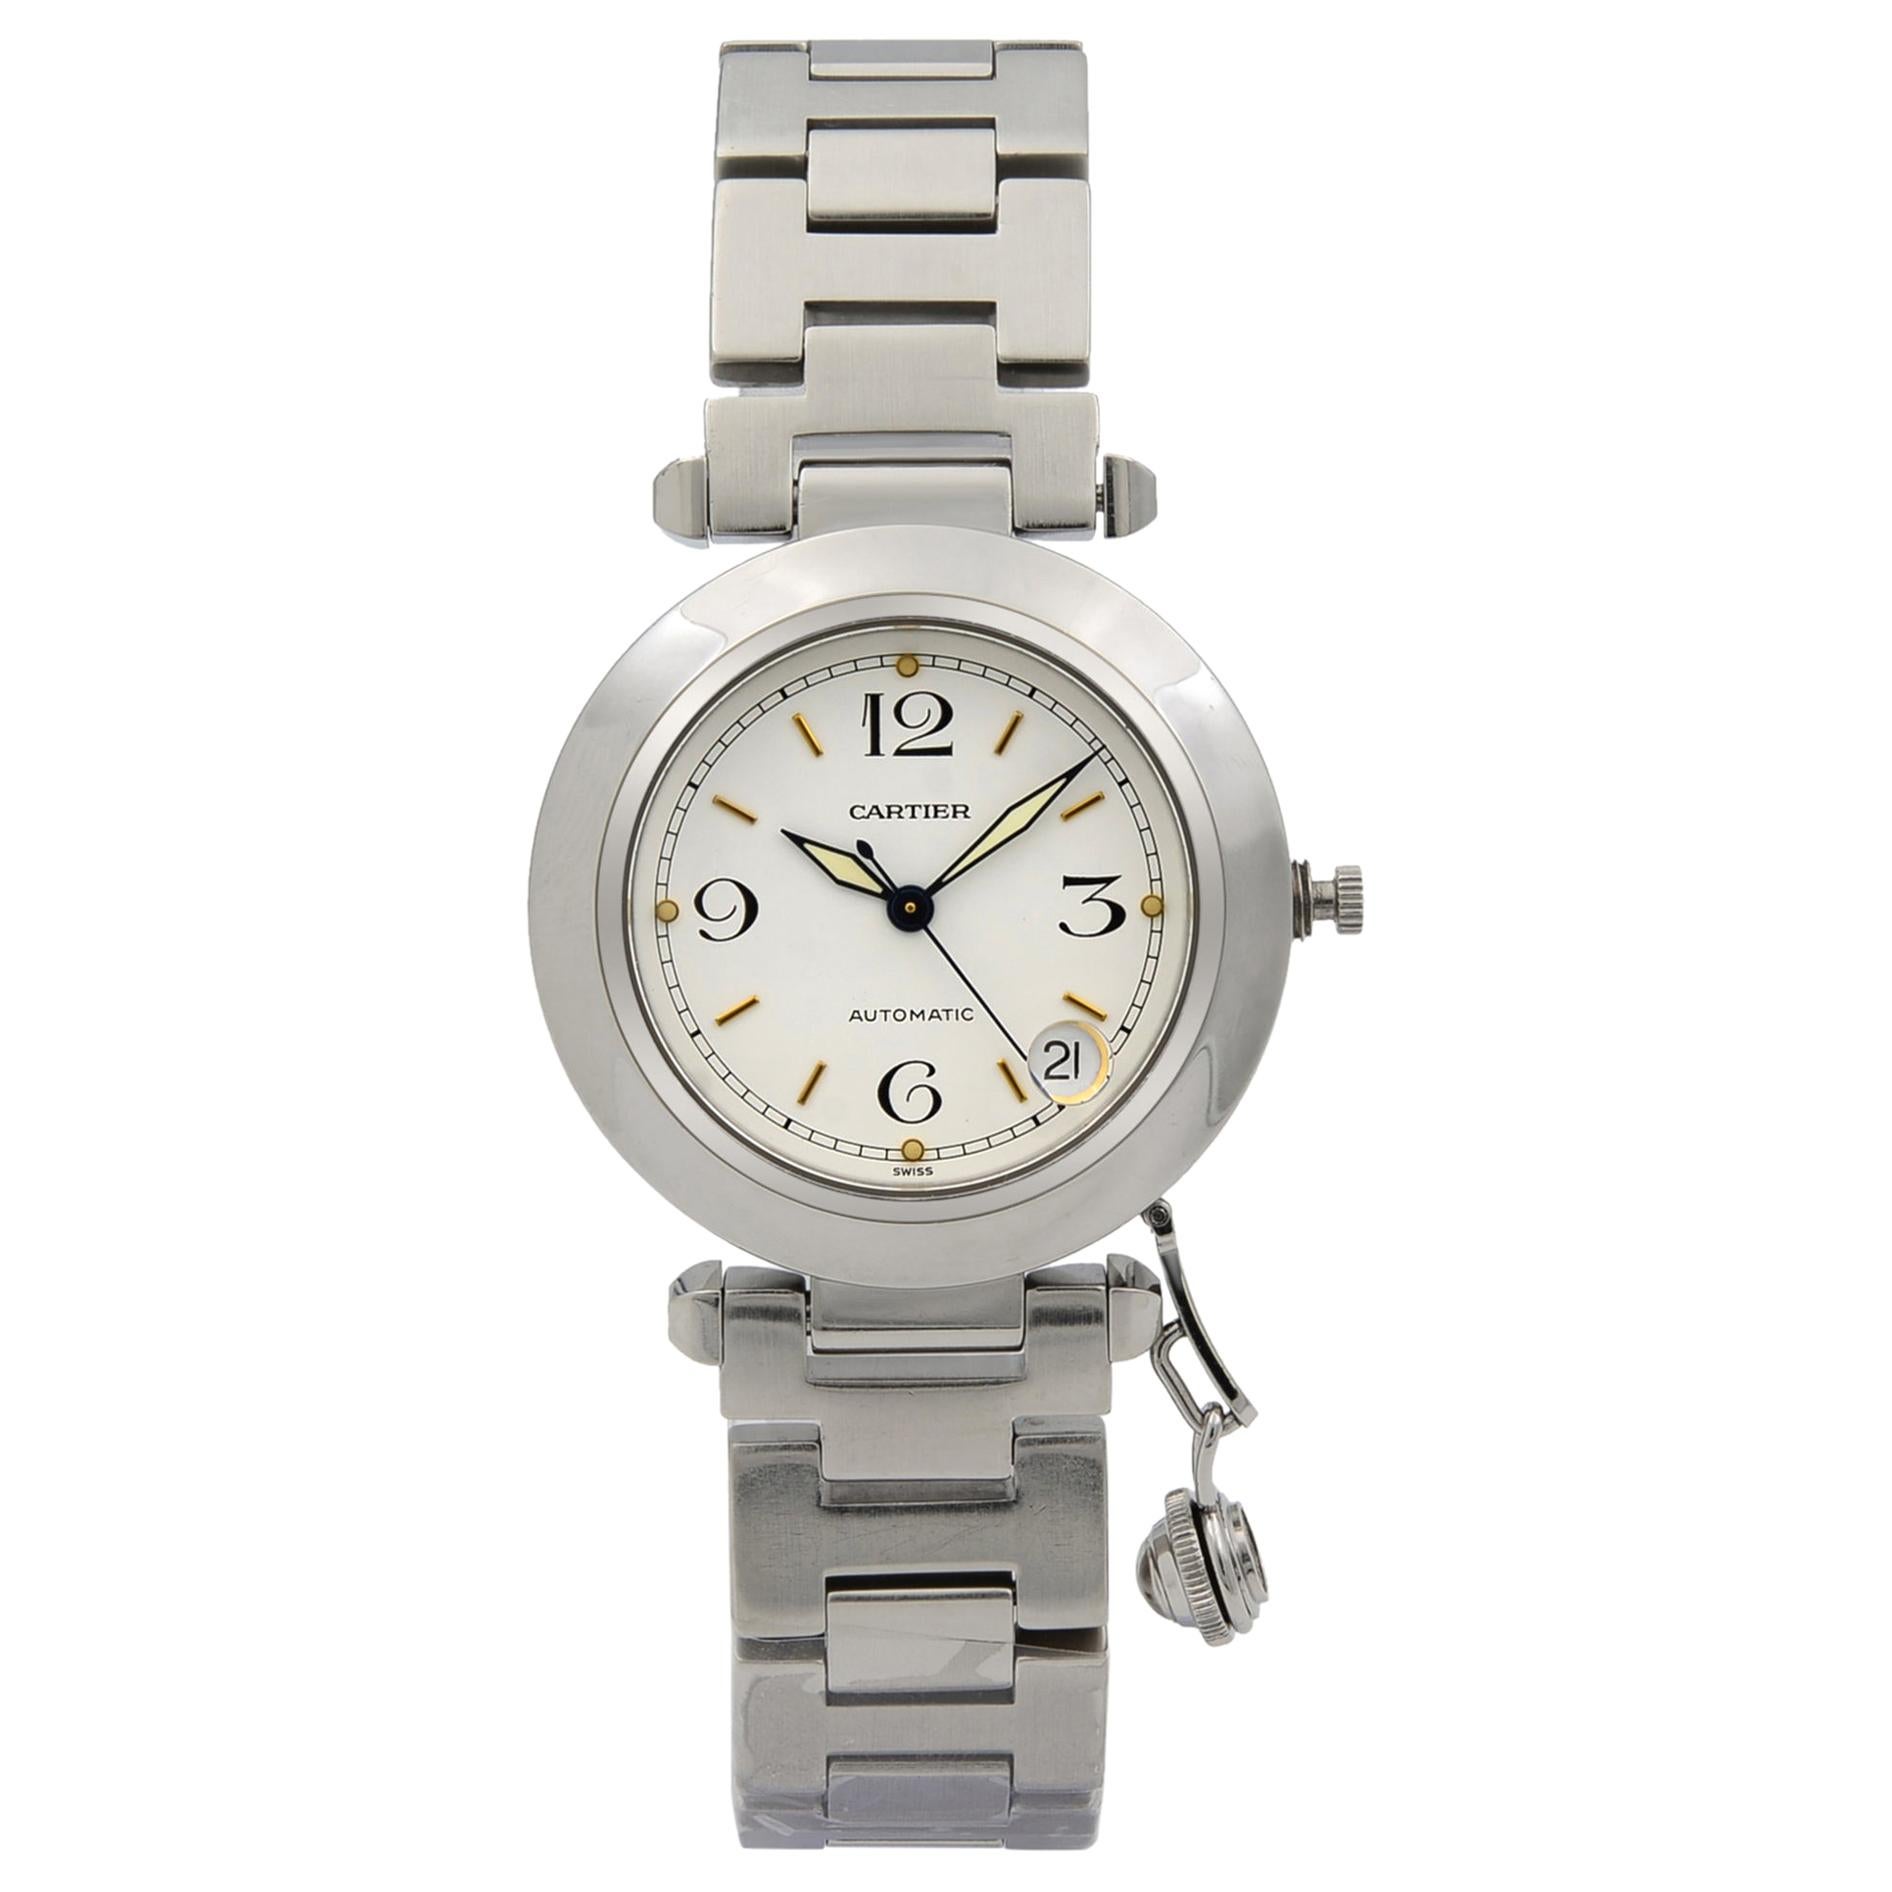 Cartier Pasha Stainless Steel White Dial Automatic Midsize Watch 1031